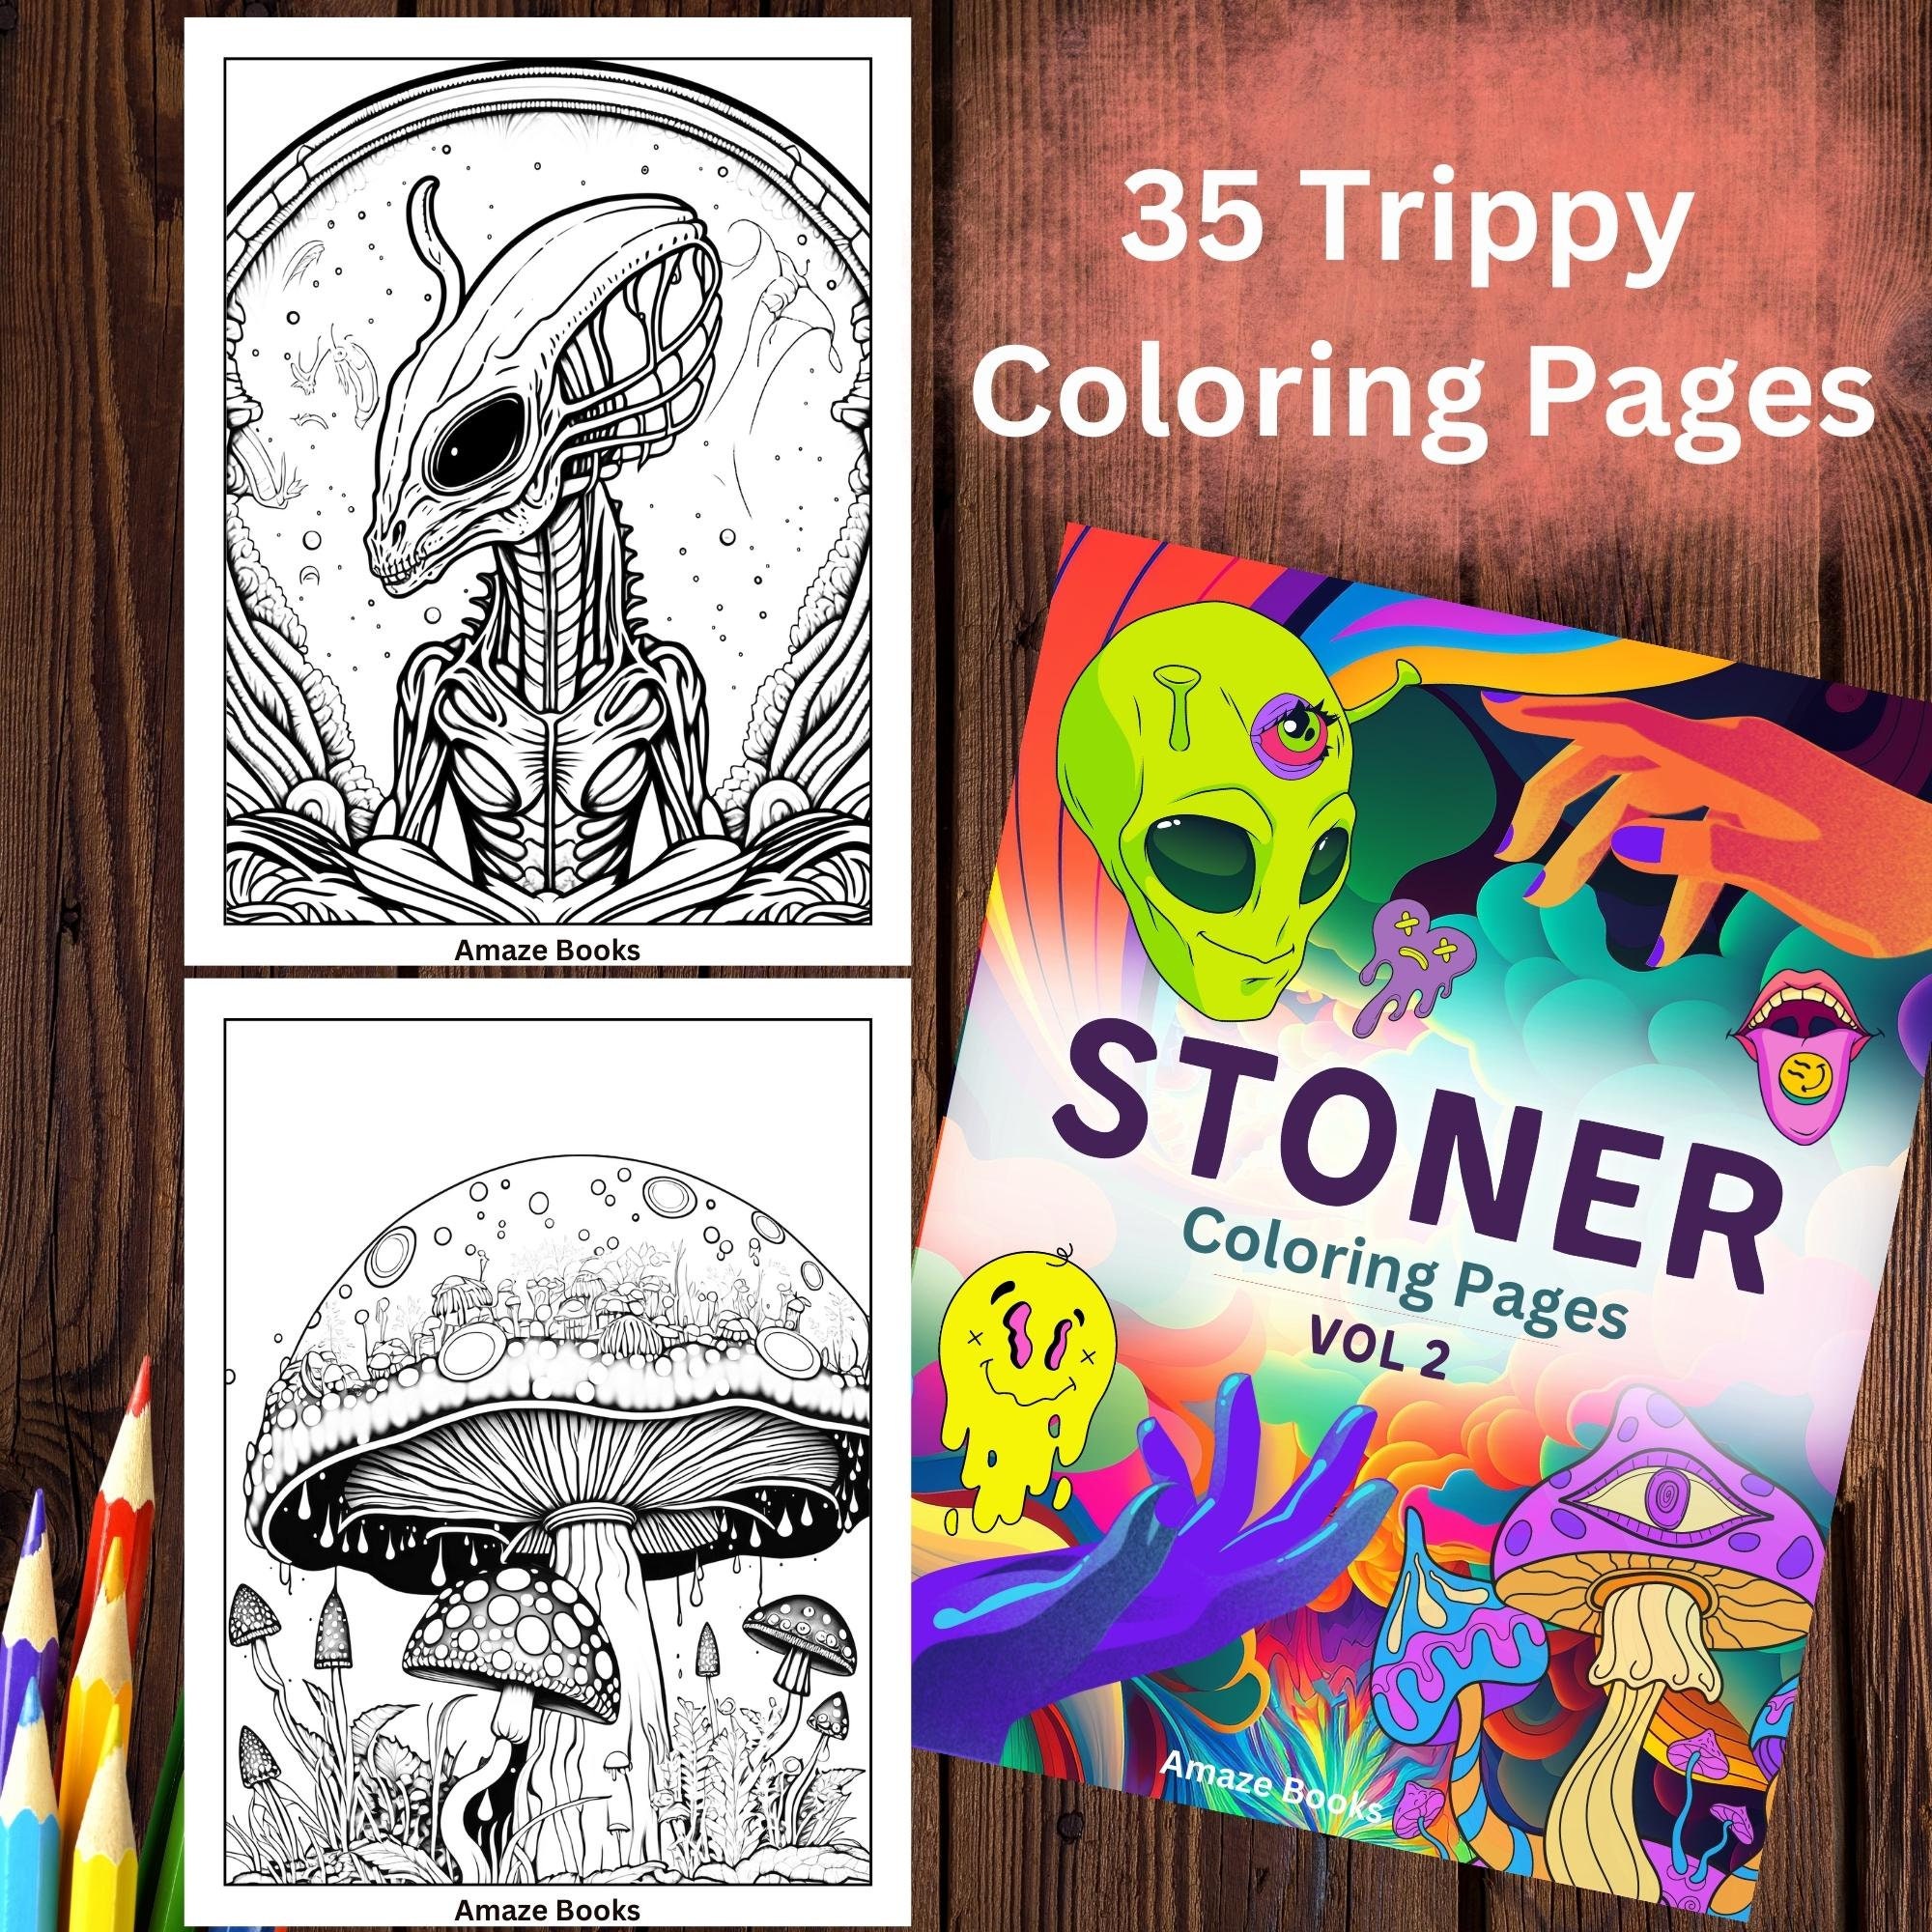 Stoner Journey Coloring Book: Adult Coloring Book Featuring Fantasy  Drawings for Stress Relief and Relaxation (Large Print / Paperback)